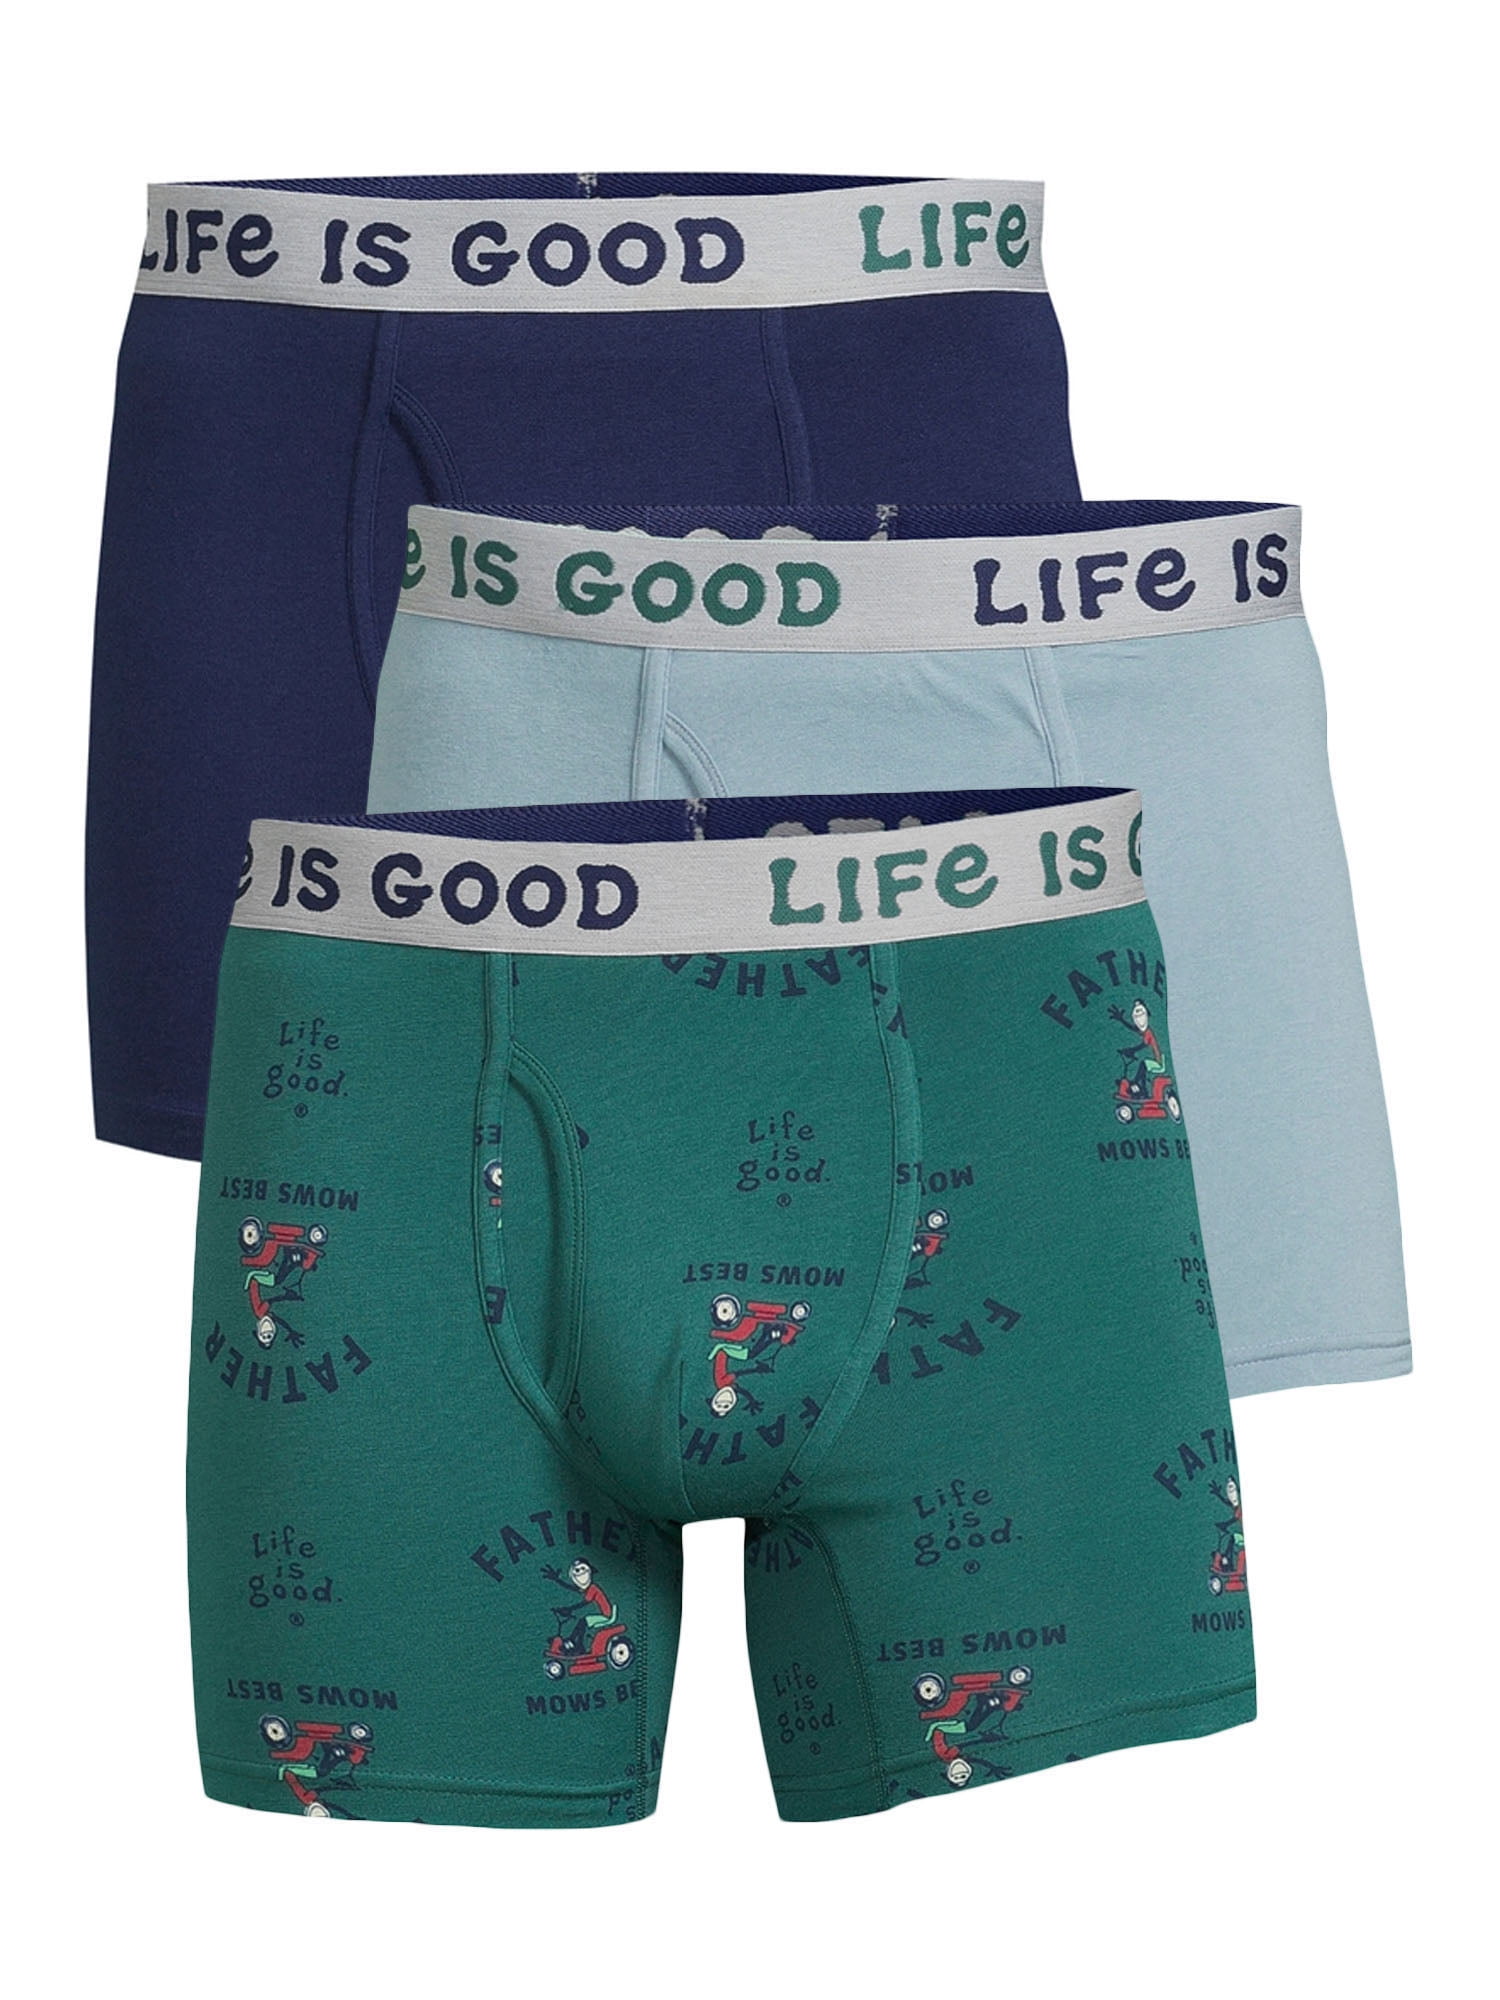 Life is Good Men's Stretch Boxer Briefs, 3-Pack 